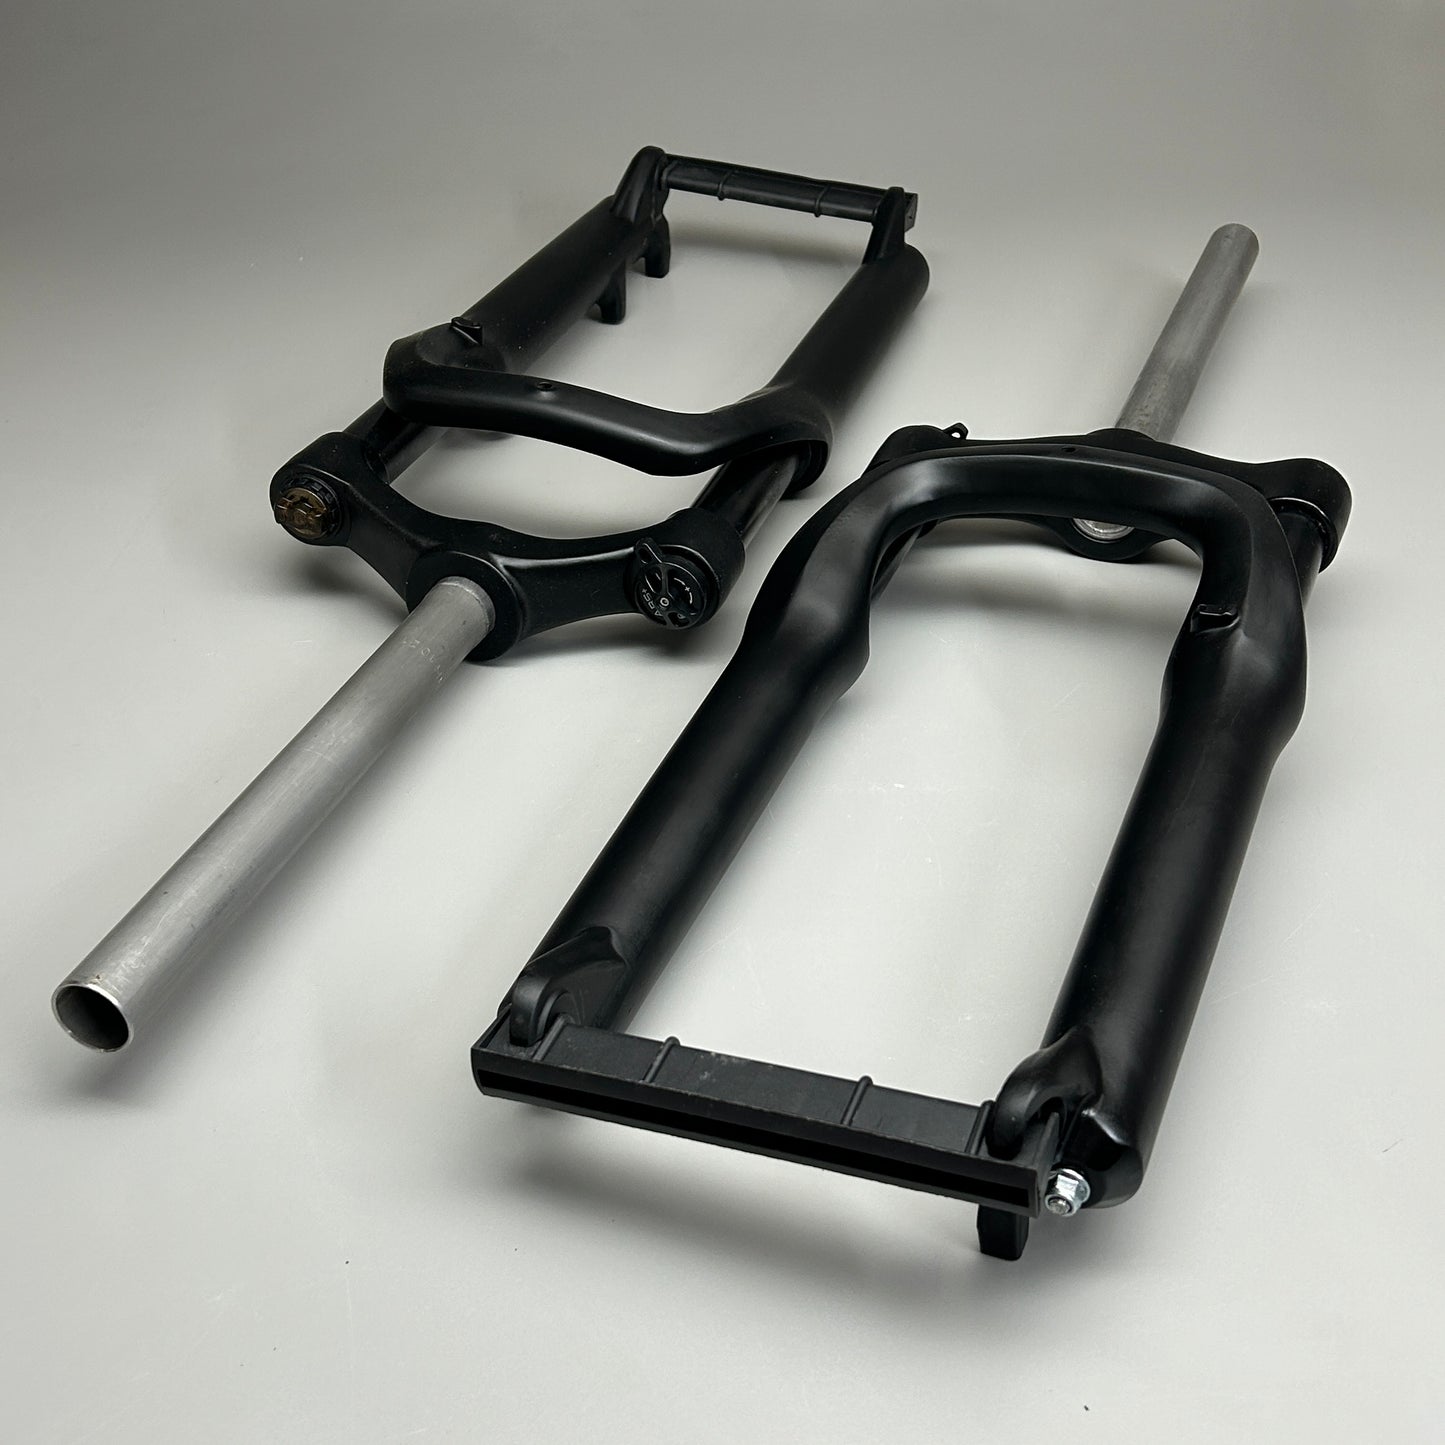 UNBRANDED 2-PACK! Mountain Bike Suspension Forks 18in (New)